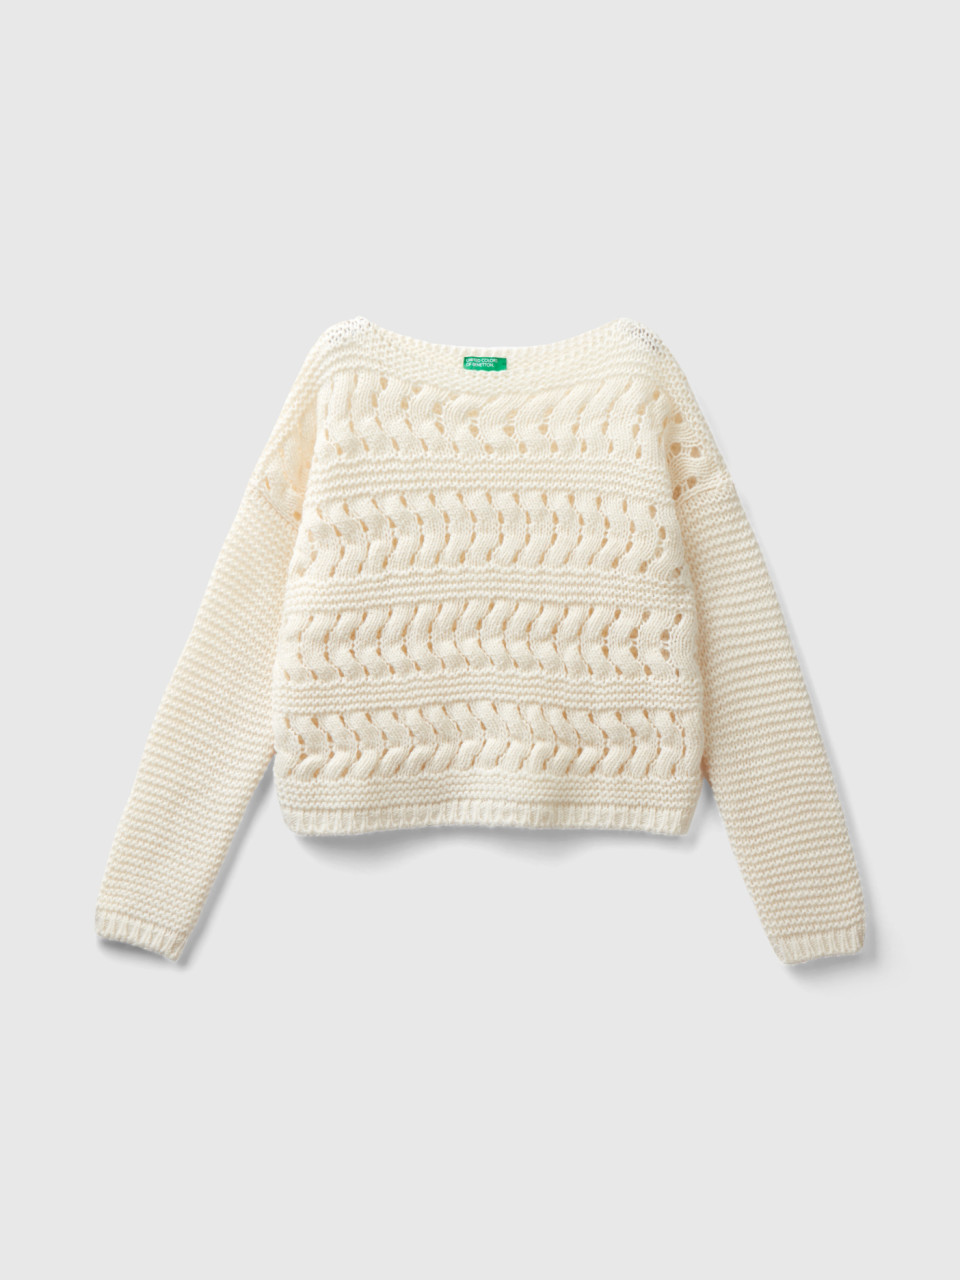 Benetton, Cable Knit Sweater In Wool Blend, Creamy White, Kids